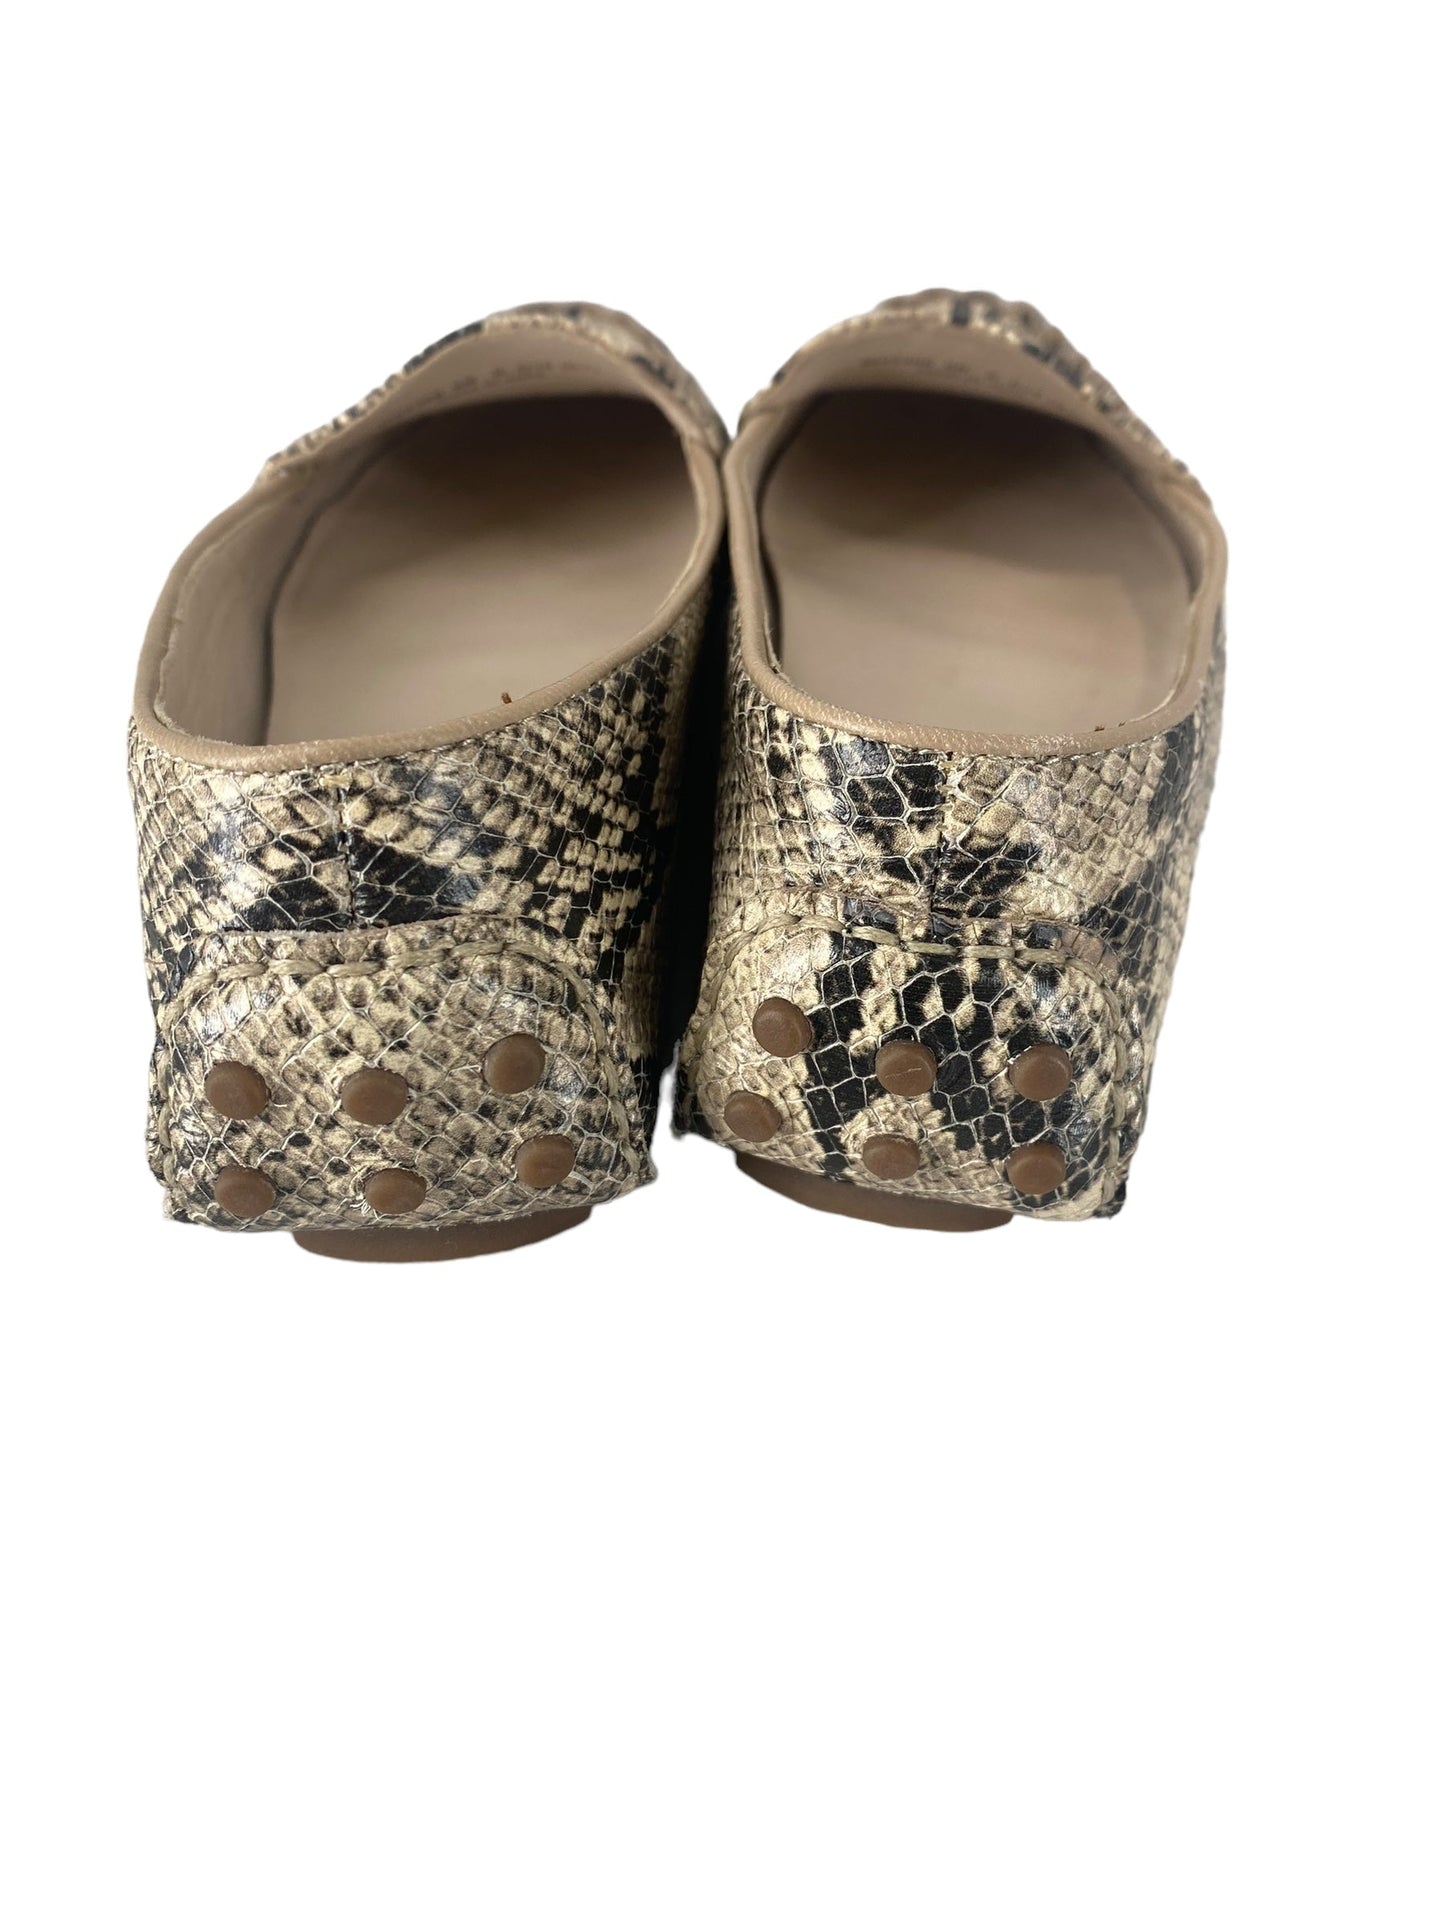 Snakeskin Print Shoes Flats Cole-haan, Size 6